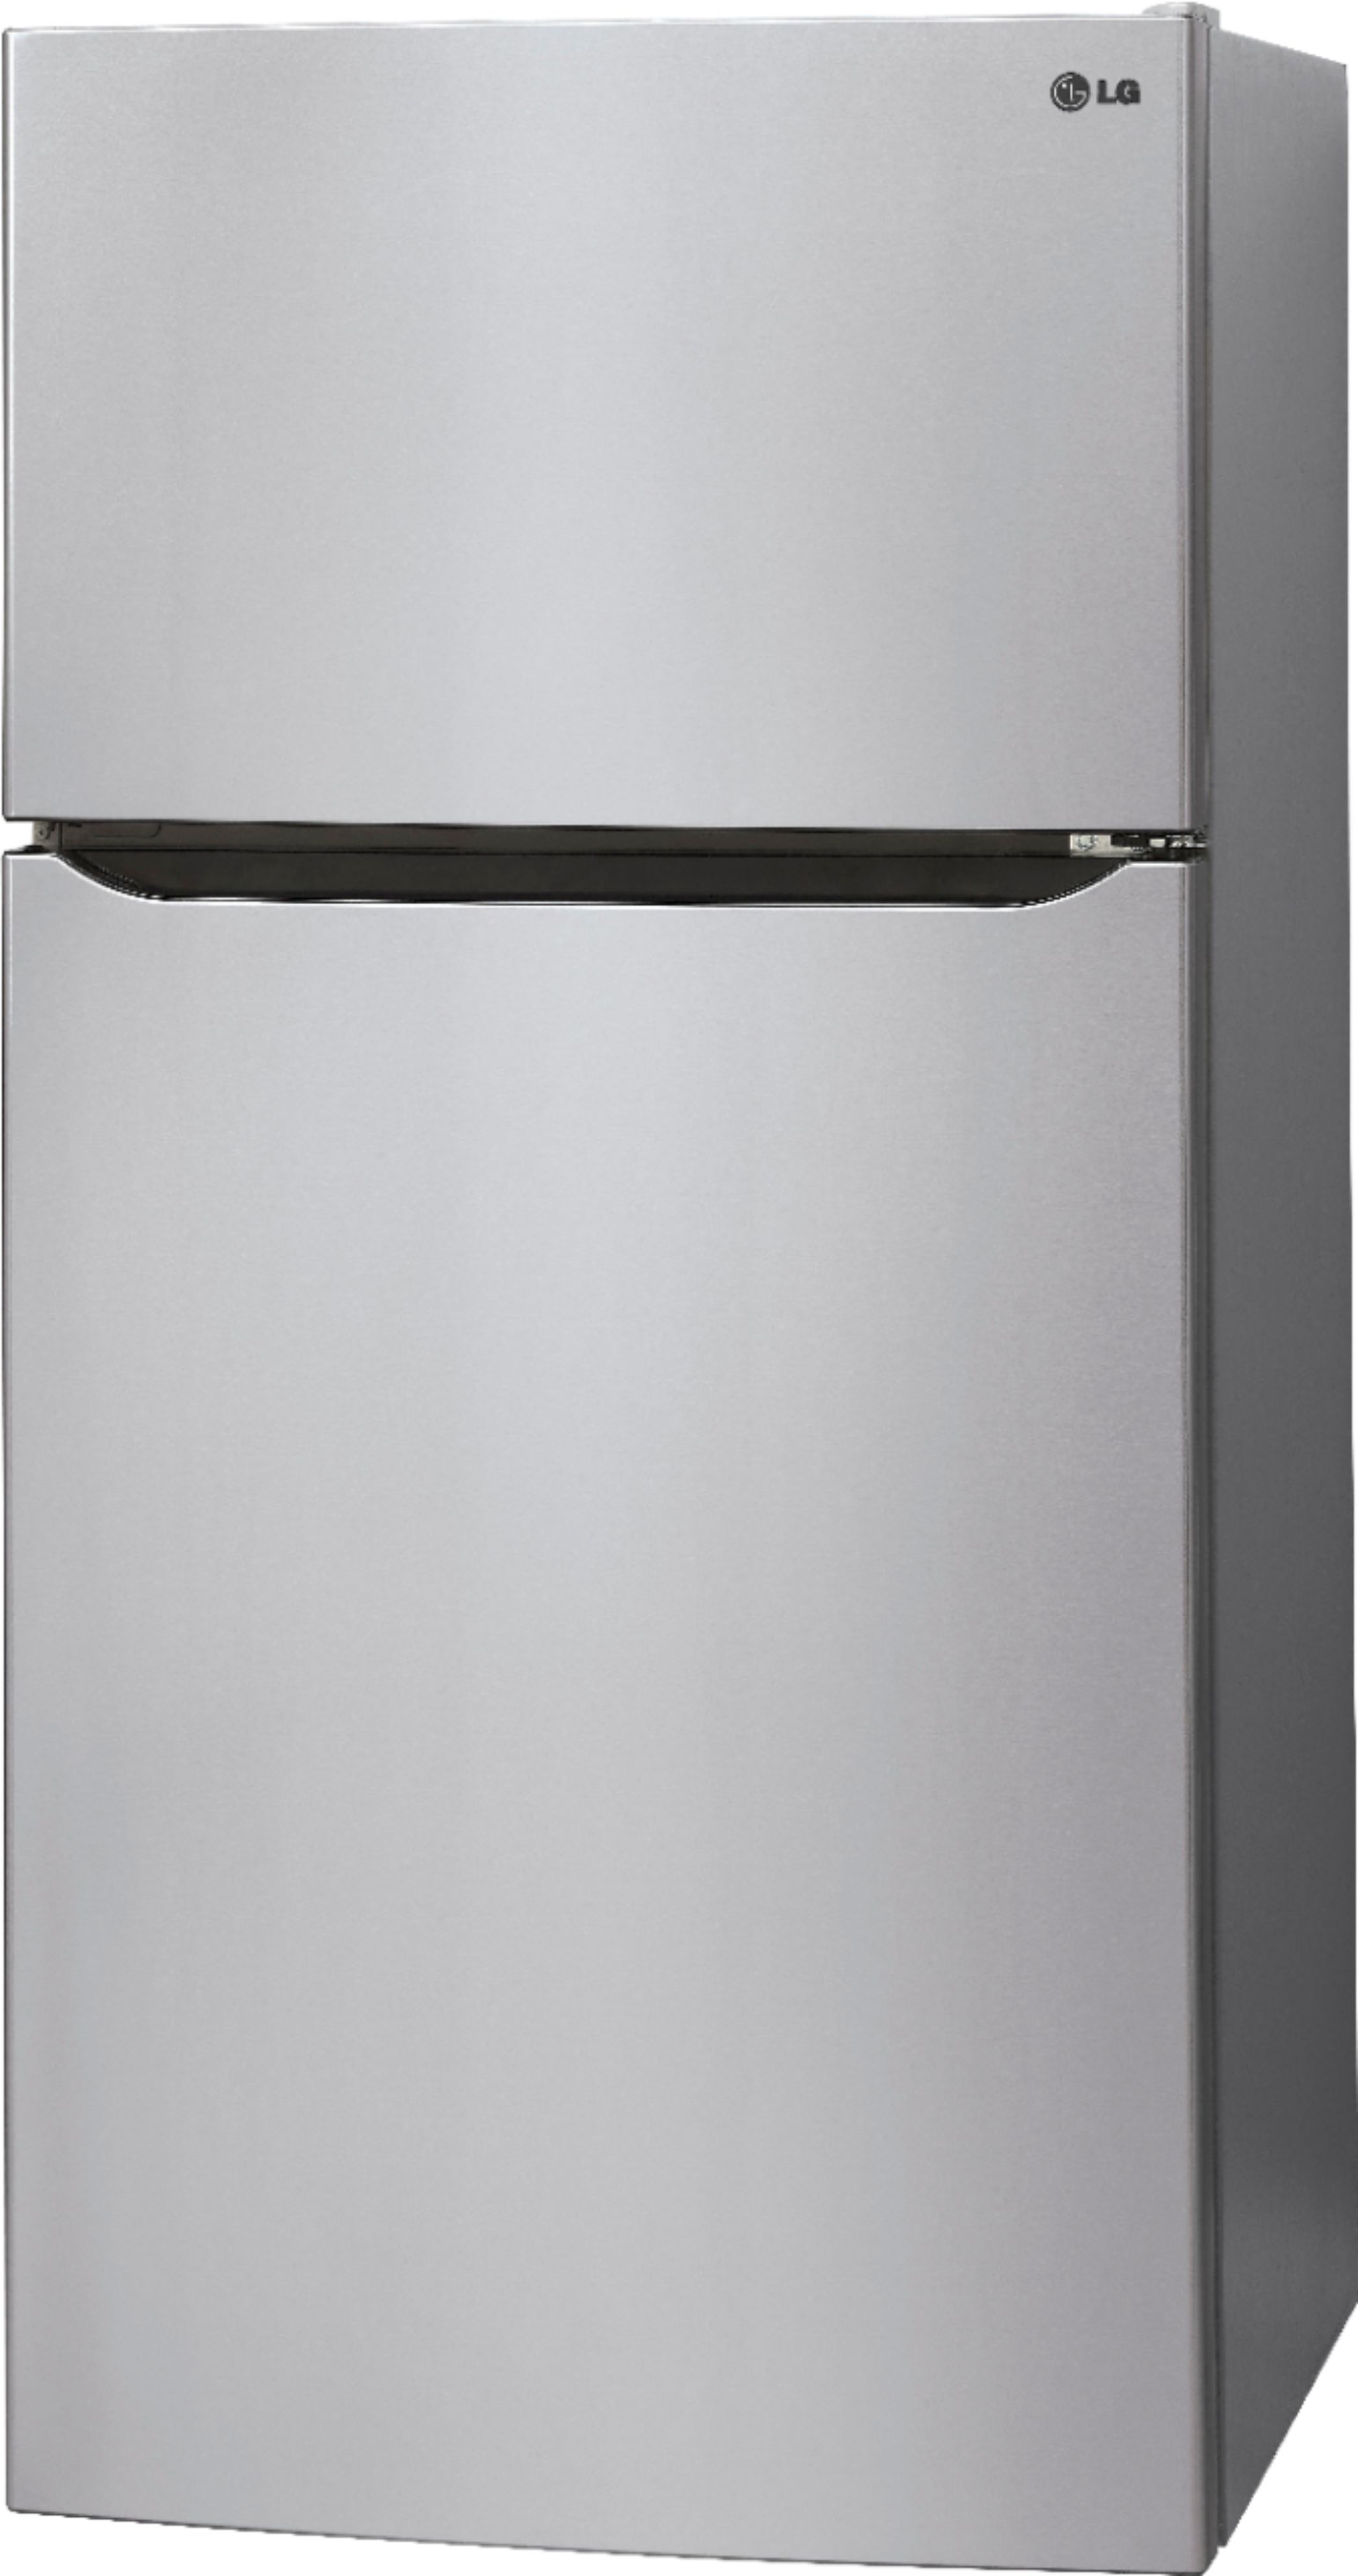 Left View: LG - 23.8 Cu. Ft. Top-Freezer Refrigerator - Stainless steel